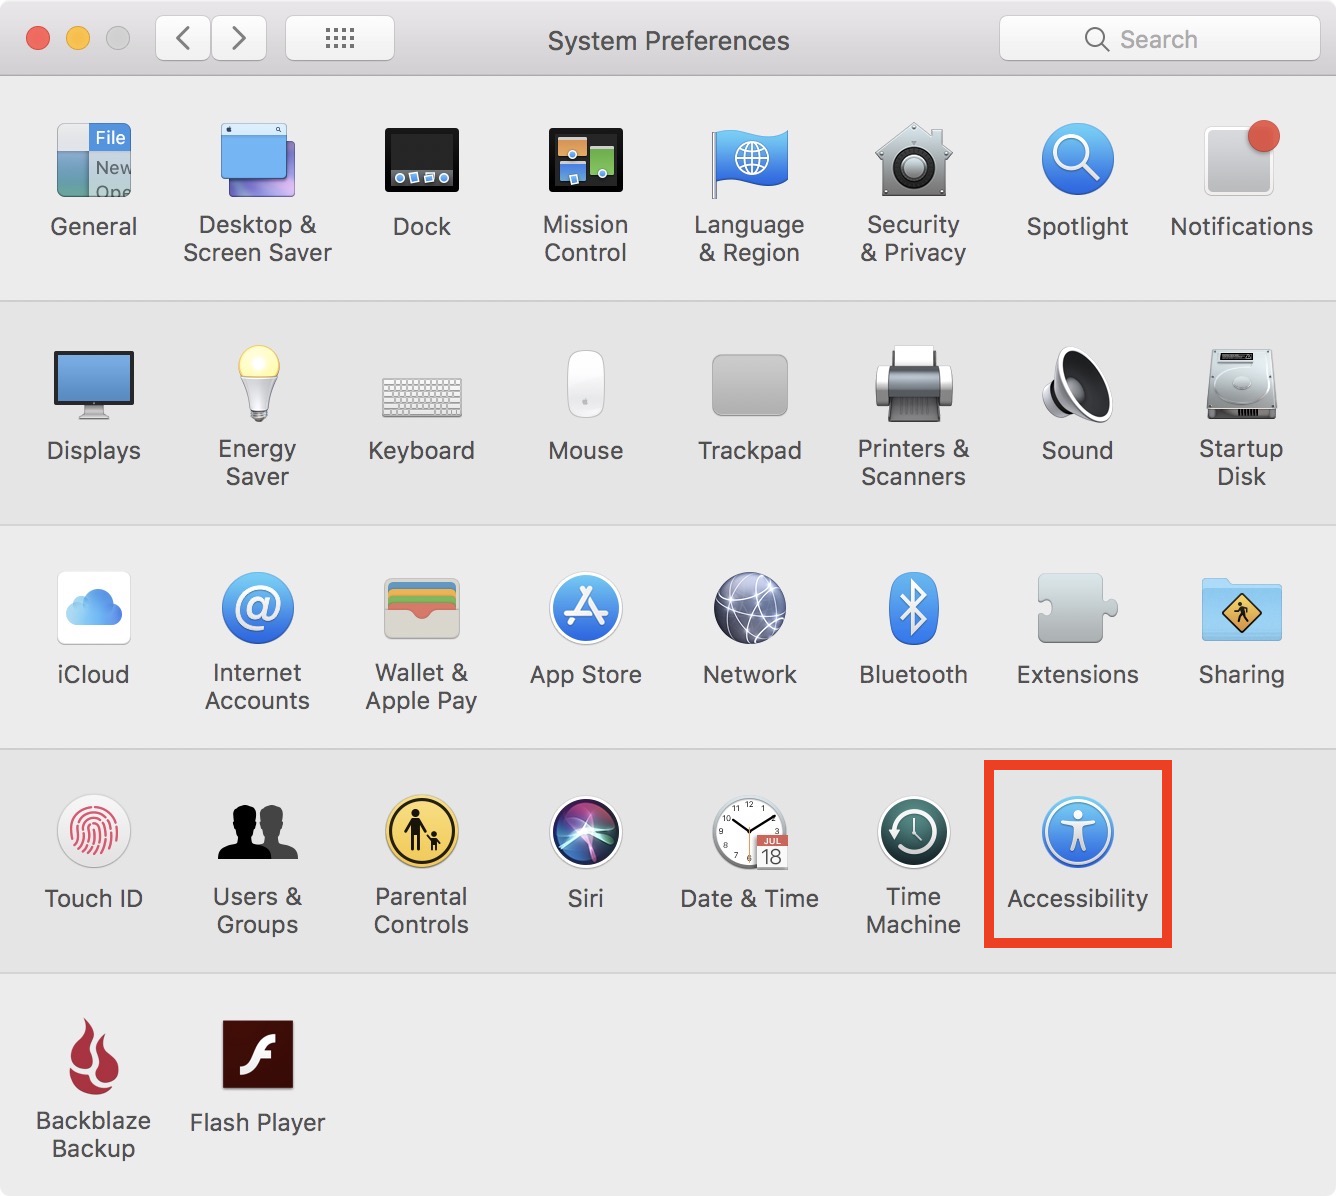 System Preferences Accessibility